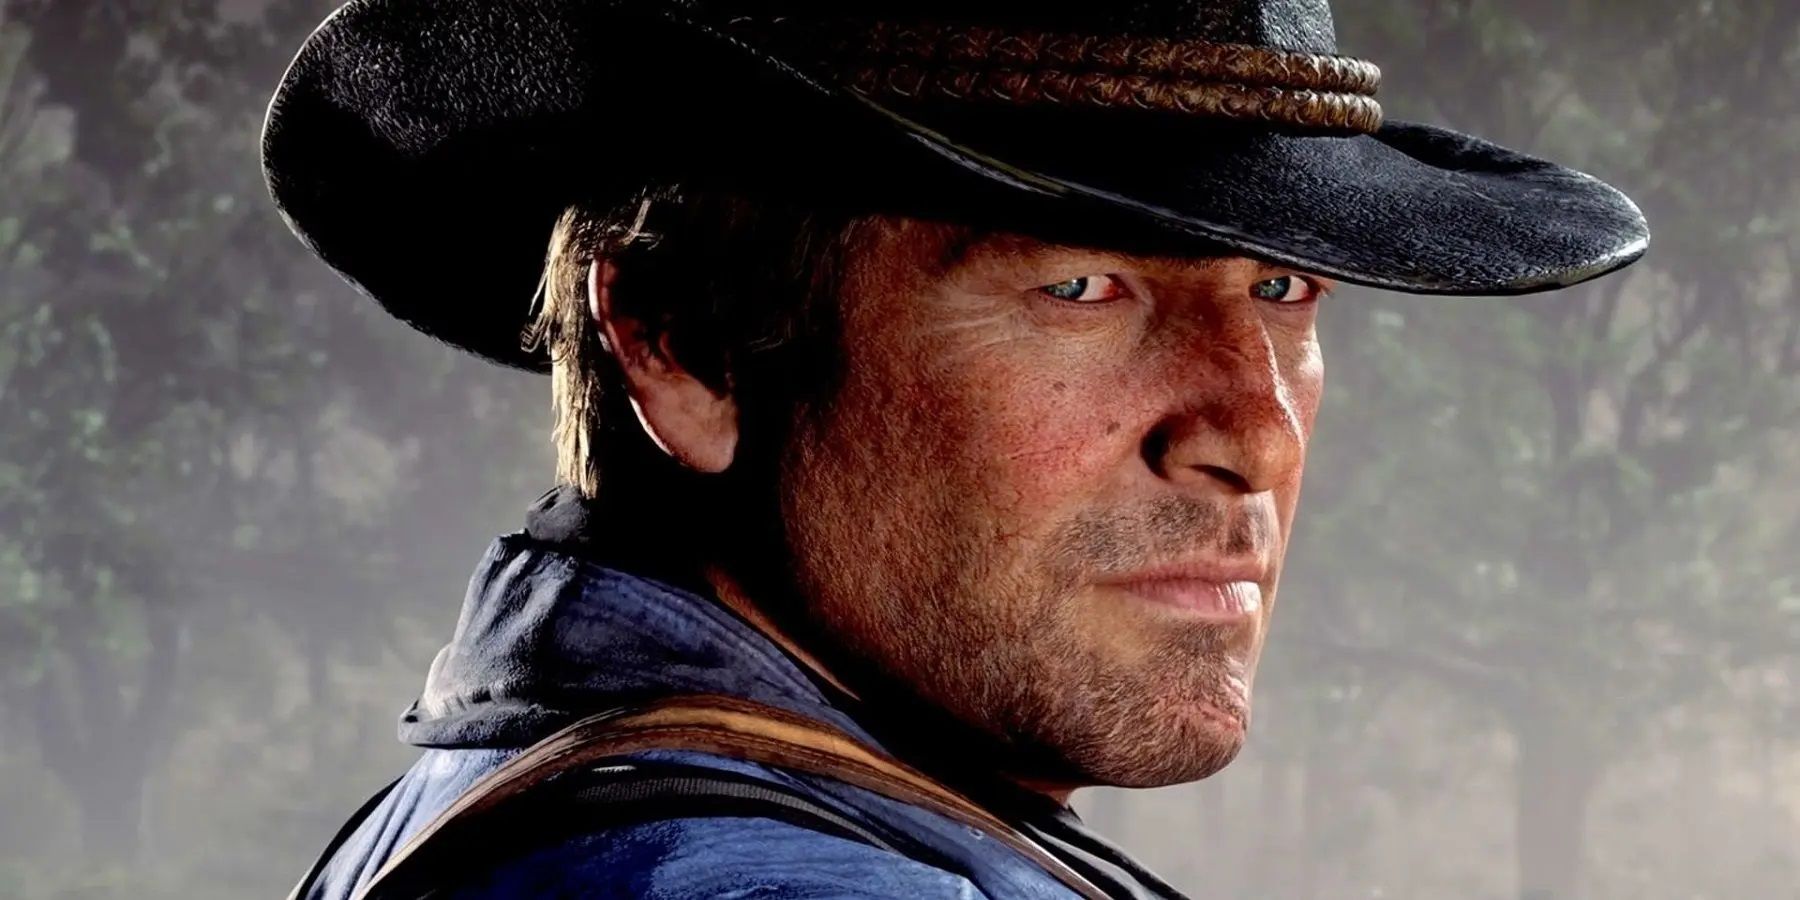 Red Dead Redemption 2 Receives 3 GB Update Following Recent
GTA Online Hacking Concerns